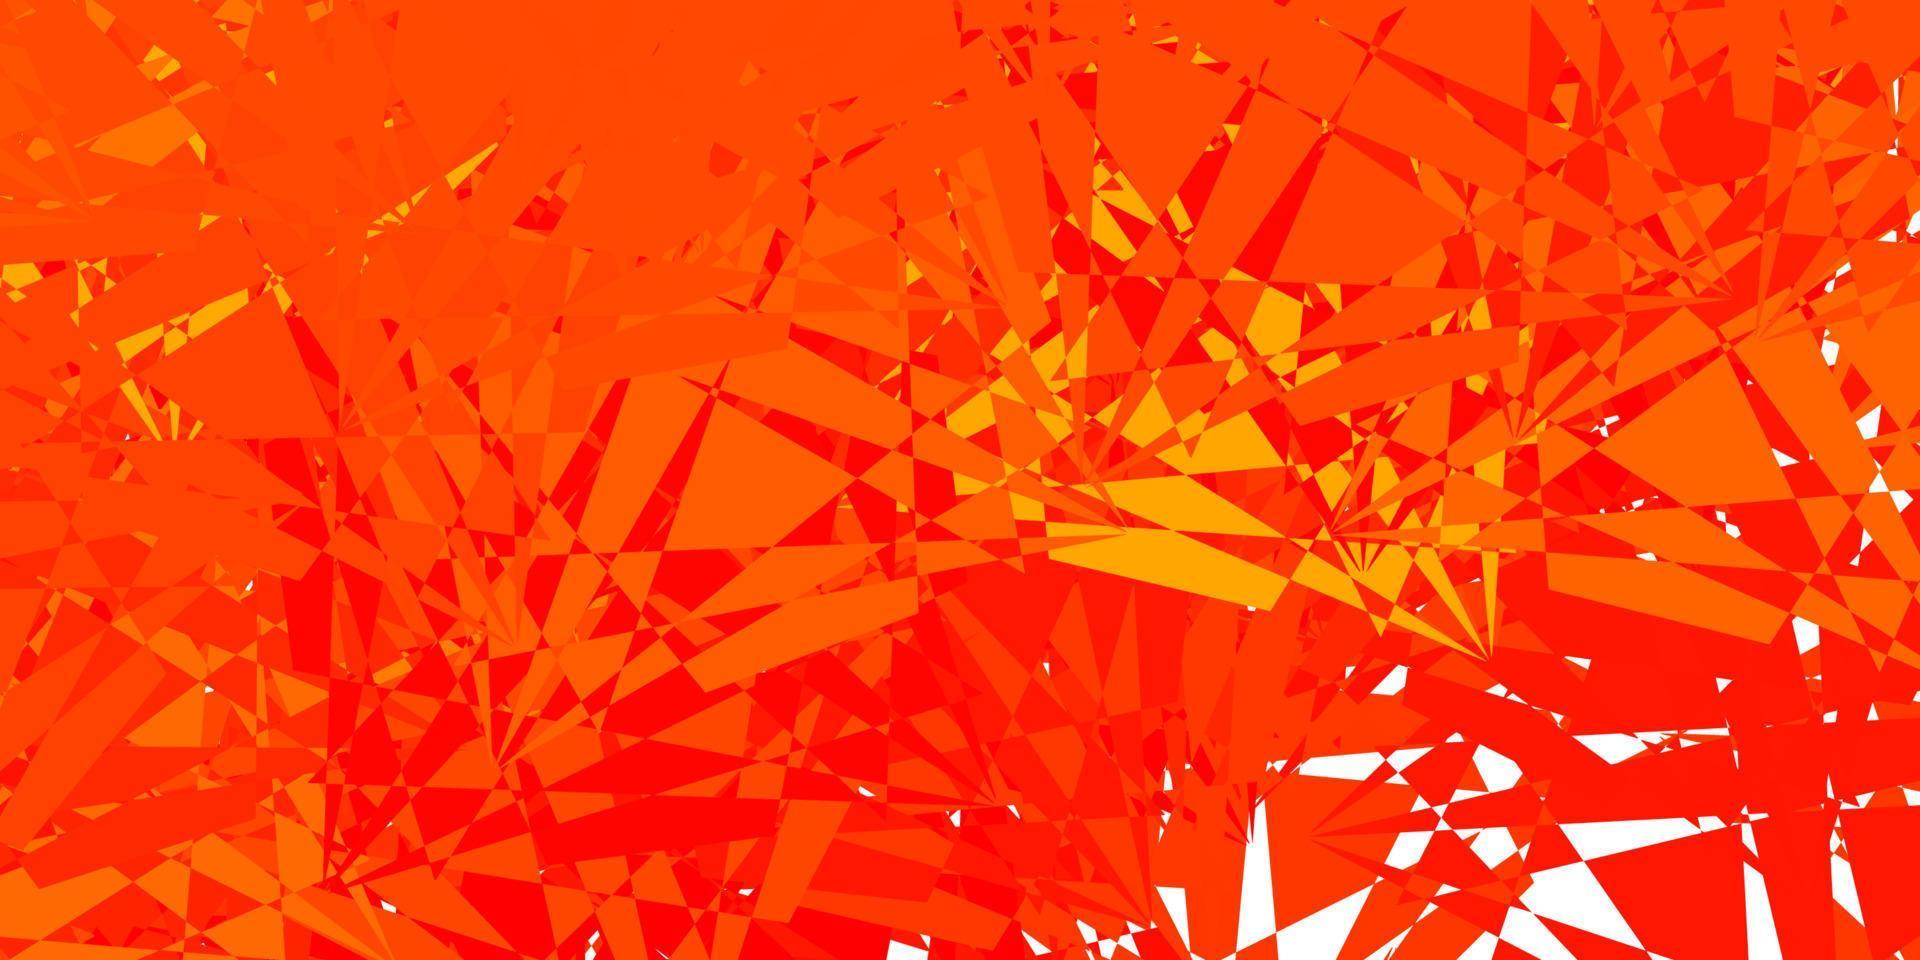 Light Orange vector background with polygonal forms.